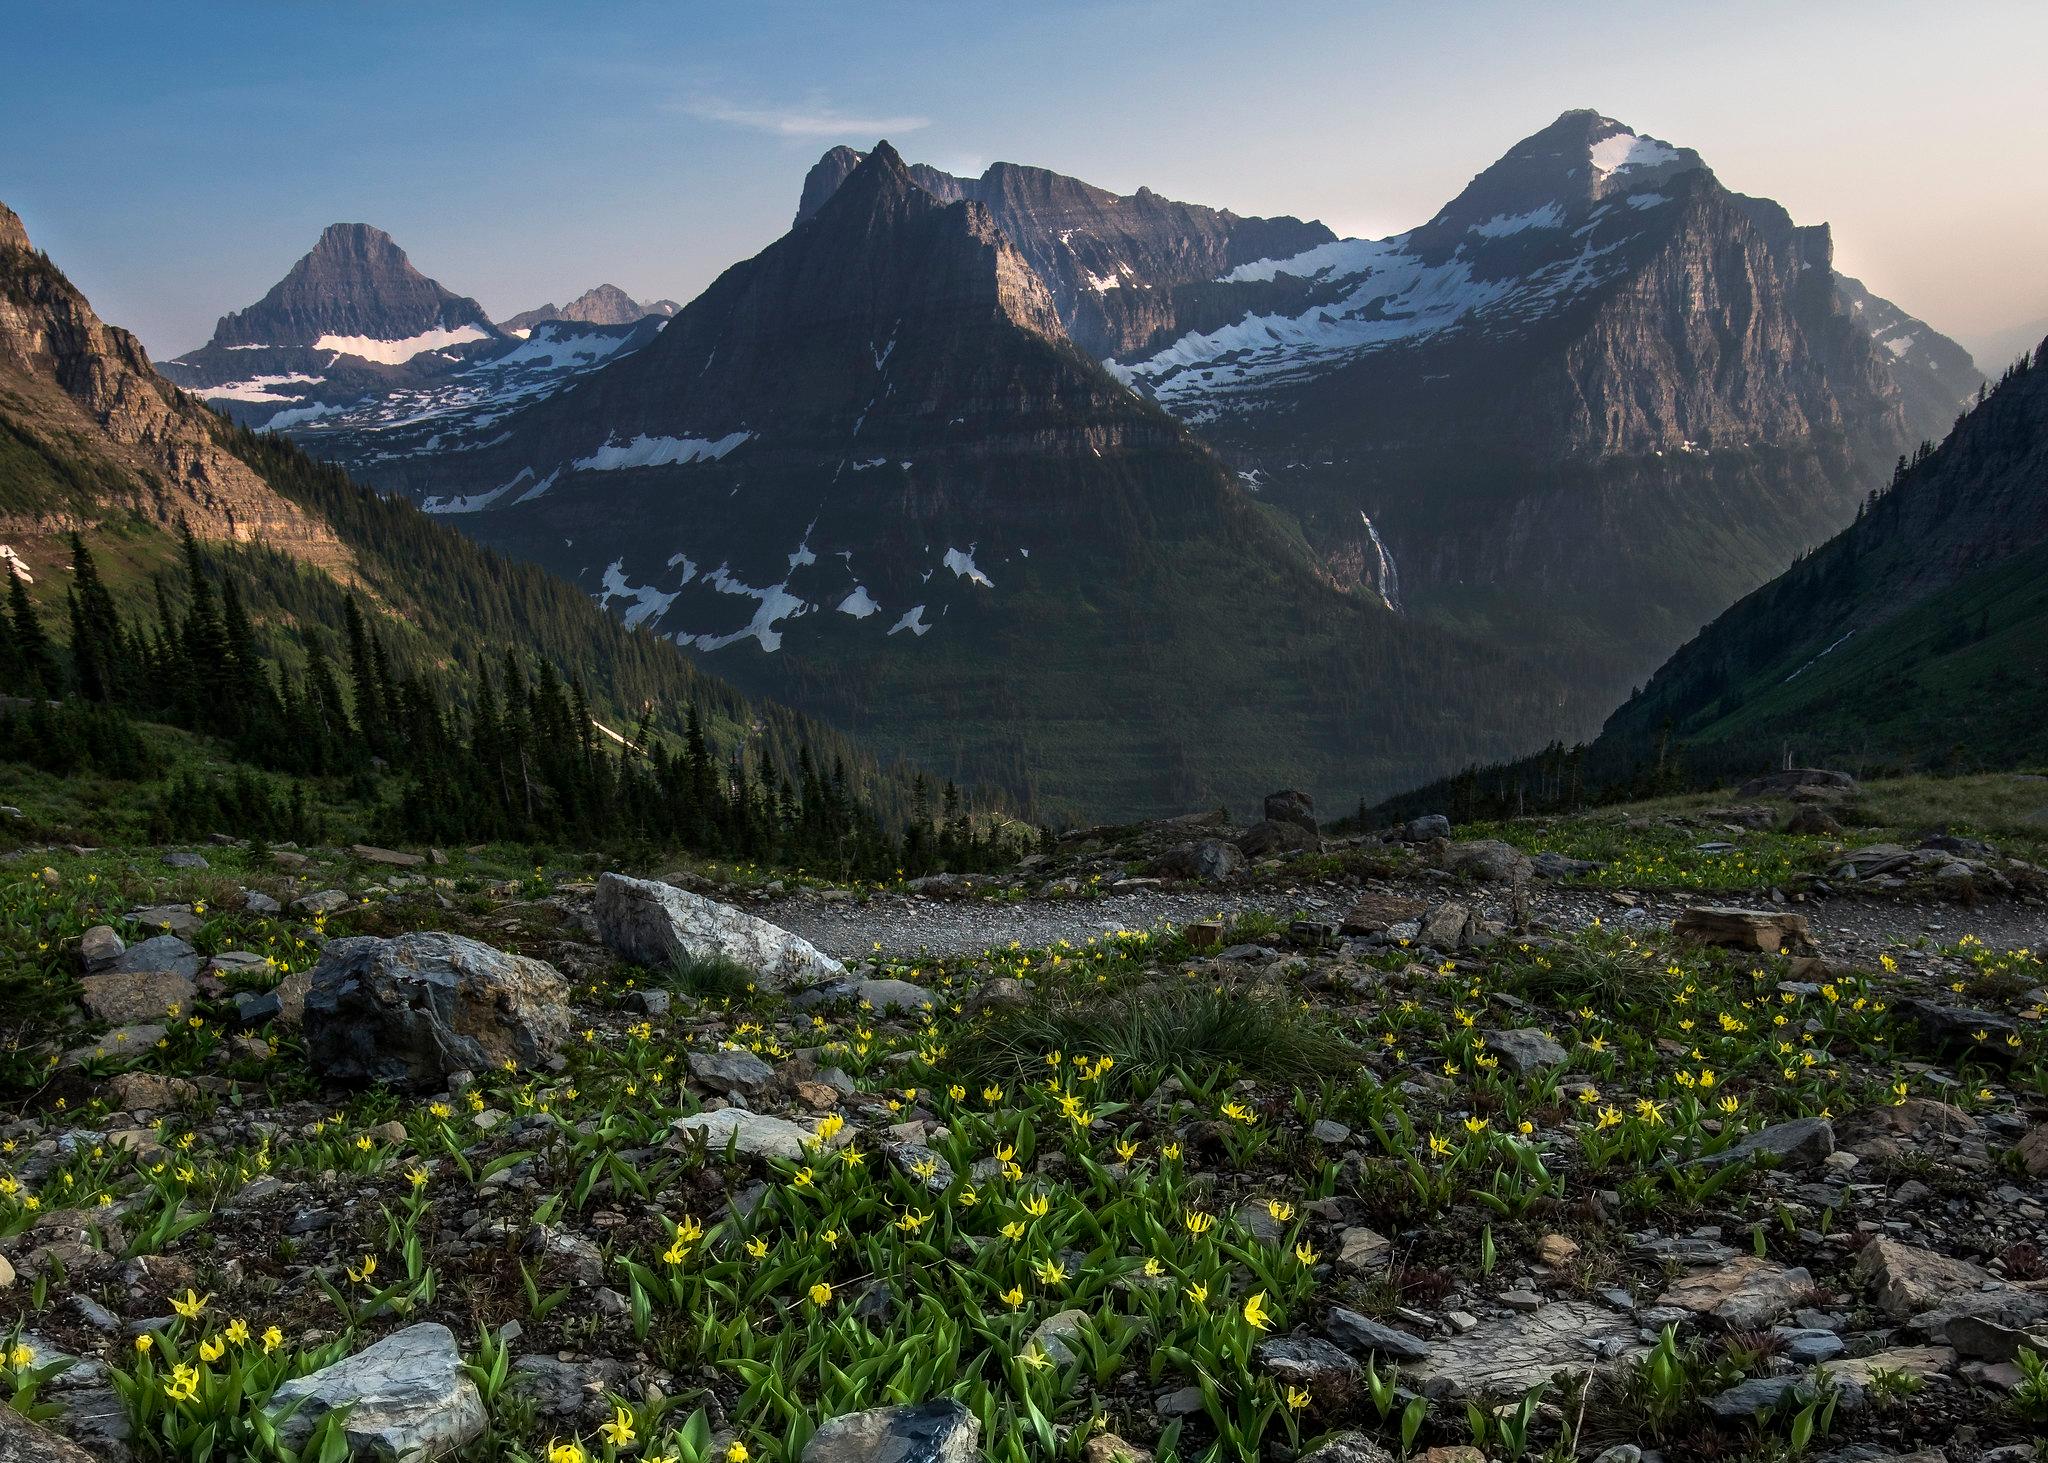 Large mountains dotted with snow loom above a rocky meadow filled with yellow flowers.